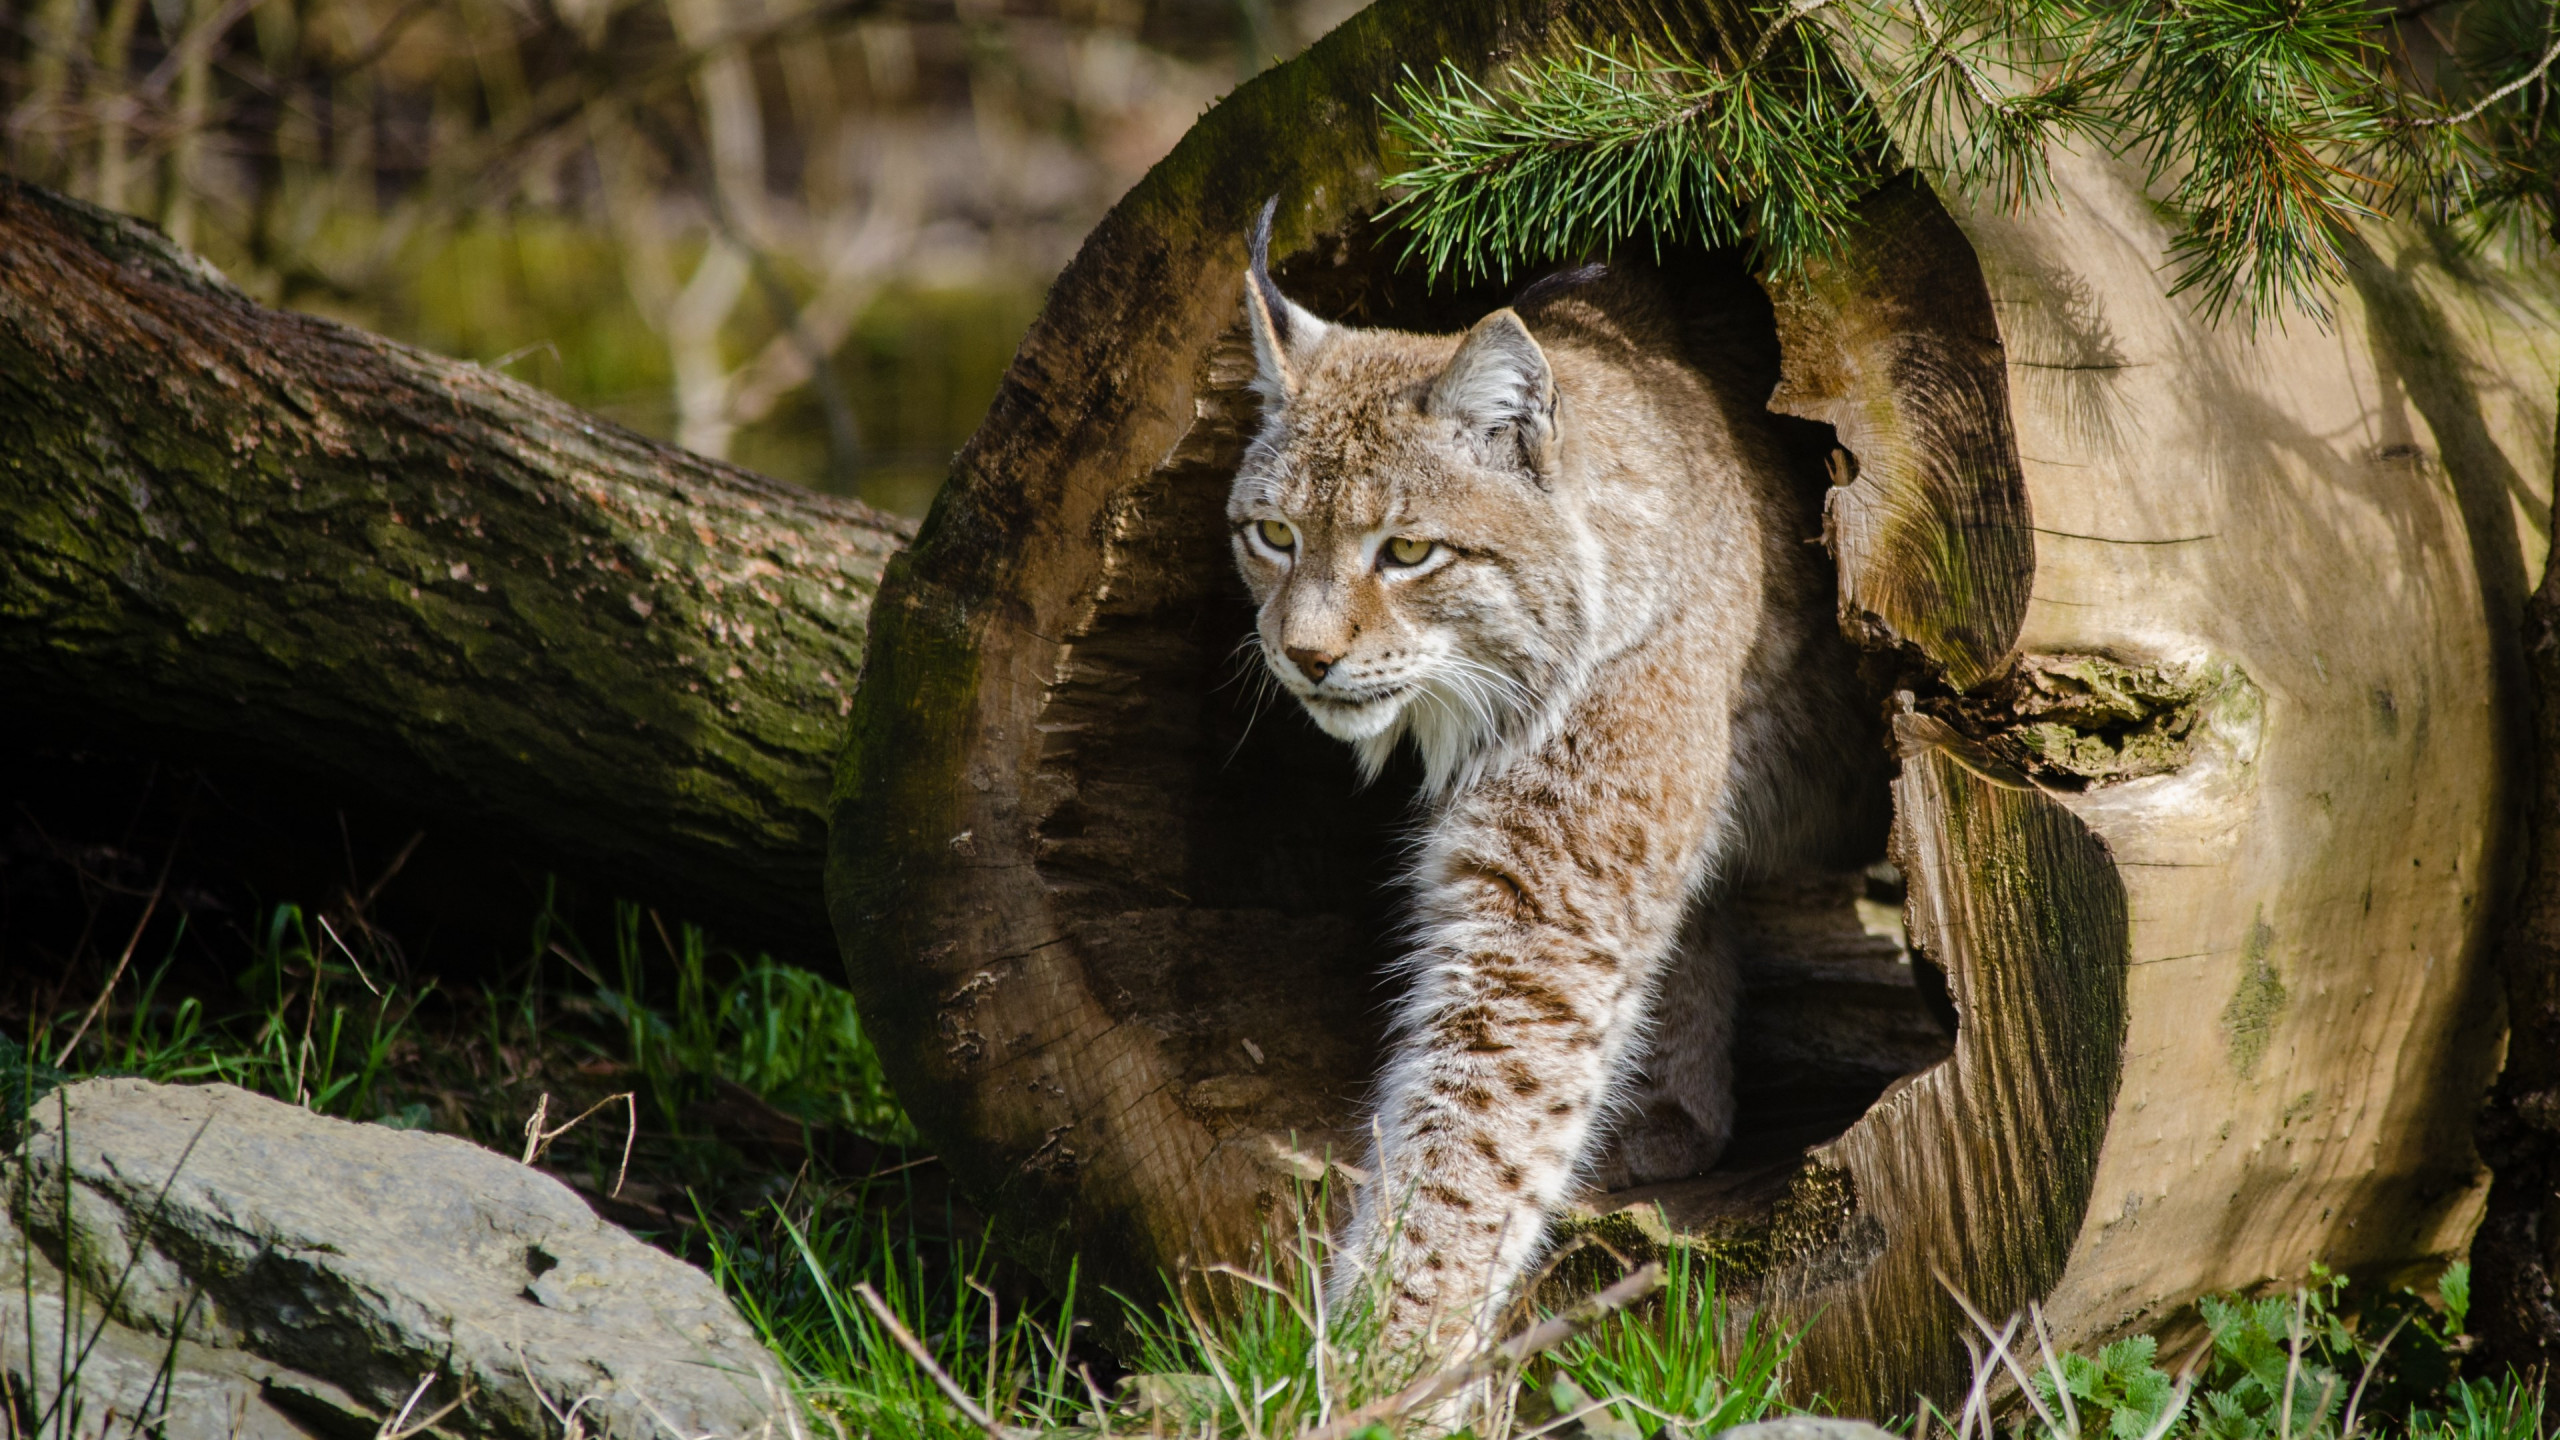 Lynx at the Zoo wallpaper 2560x1440